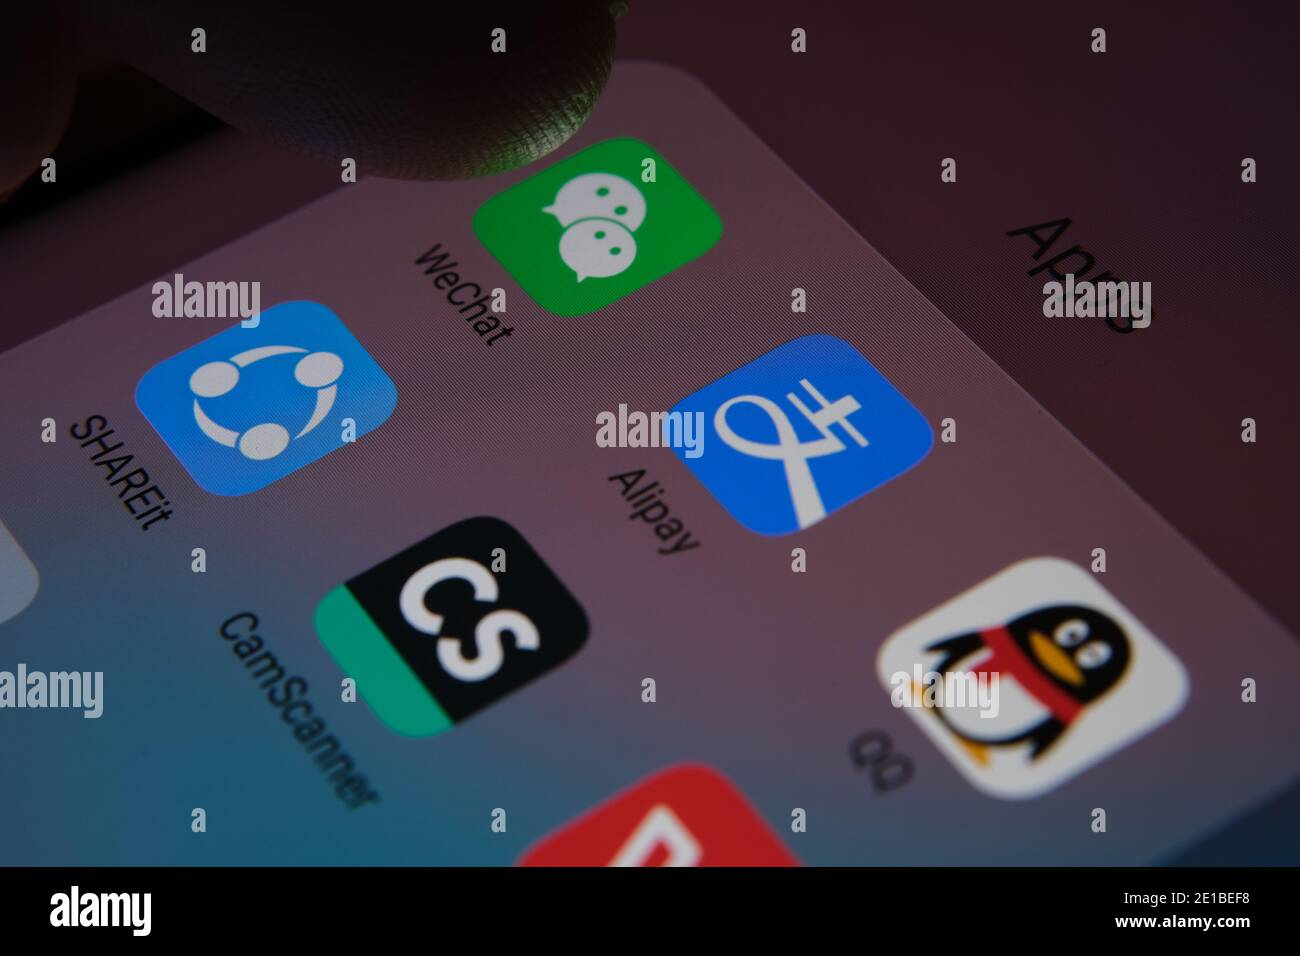 Stafford, United Kingdom - January 6 2021: Alipay, WeChat, QQ, SHAREit, CamScanner, WPS Office apps seen on the screen and blurred finger on top of th Stock Photo